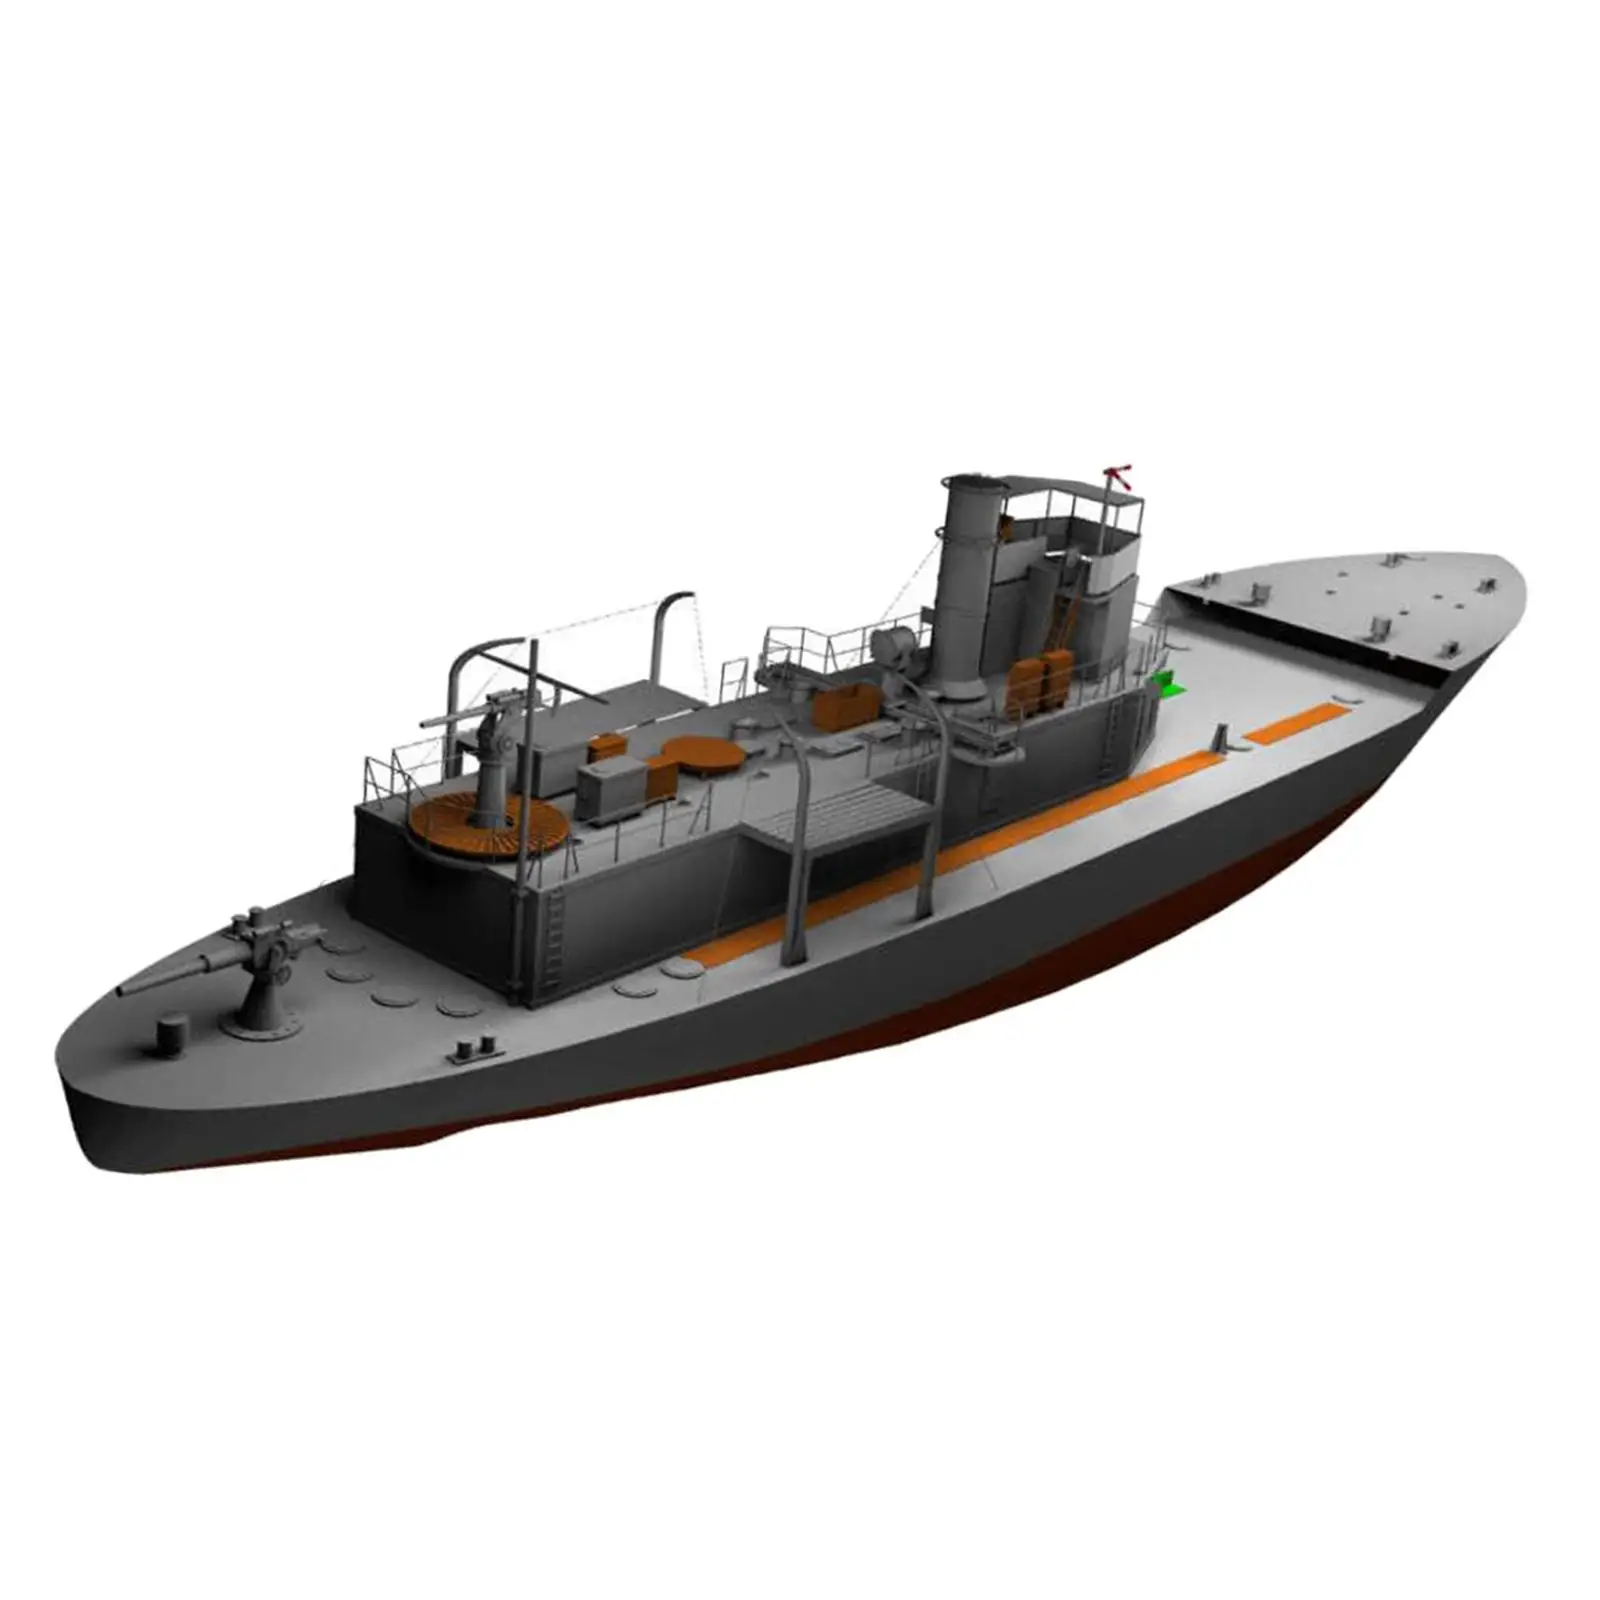 Patrol Boat Scale Model DIY Paper Ship Ship and Boat Jigsaw Puzzles 1/100 for Home Decoration Children Desktop Ornaments Gift